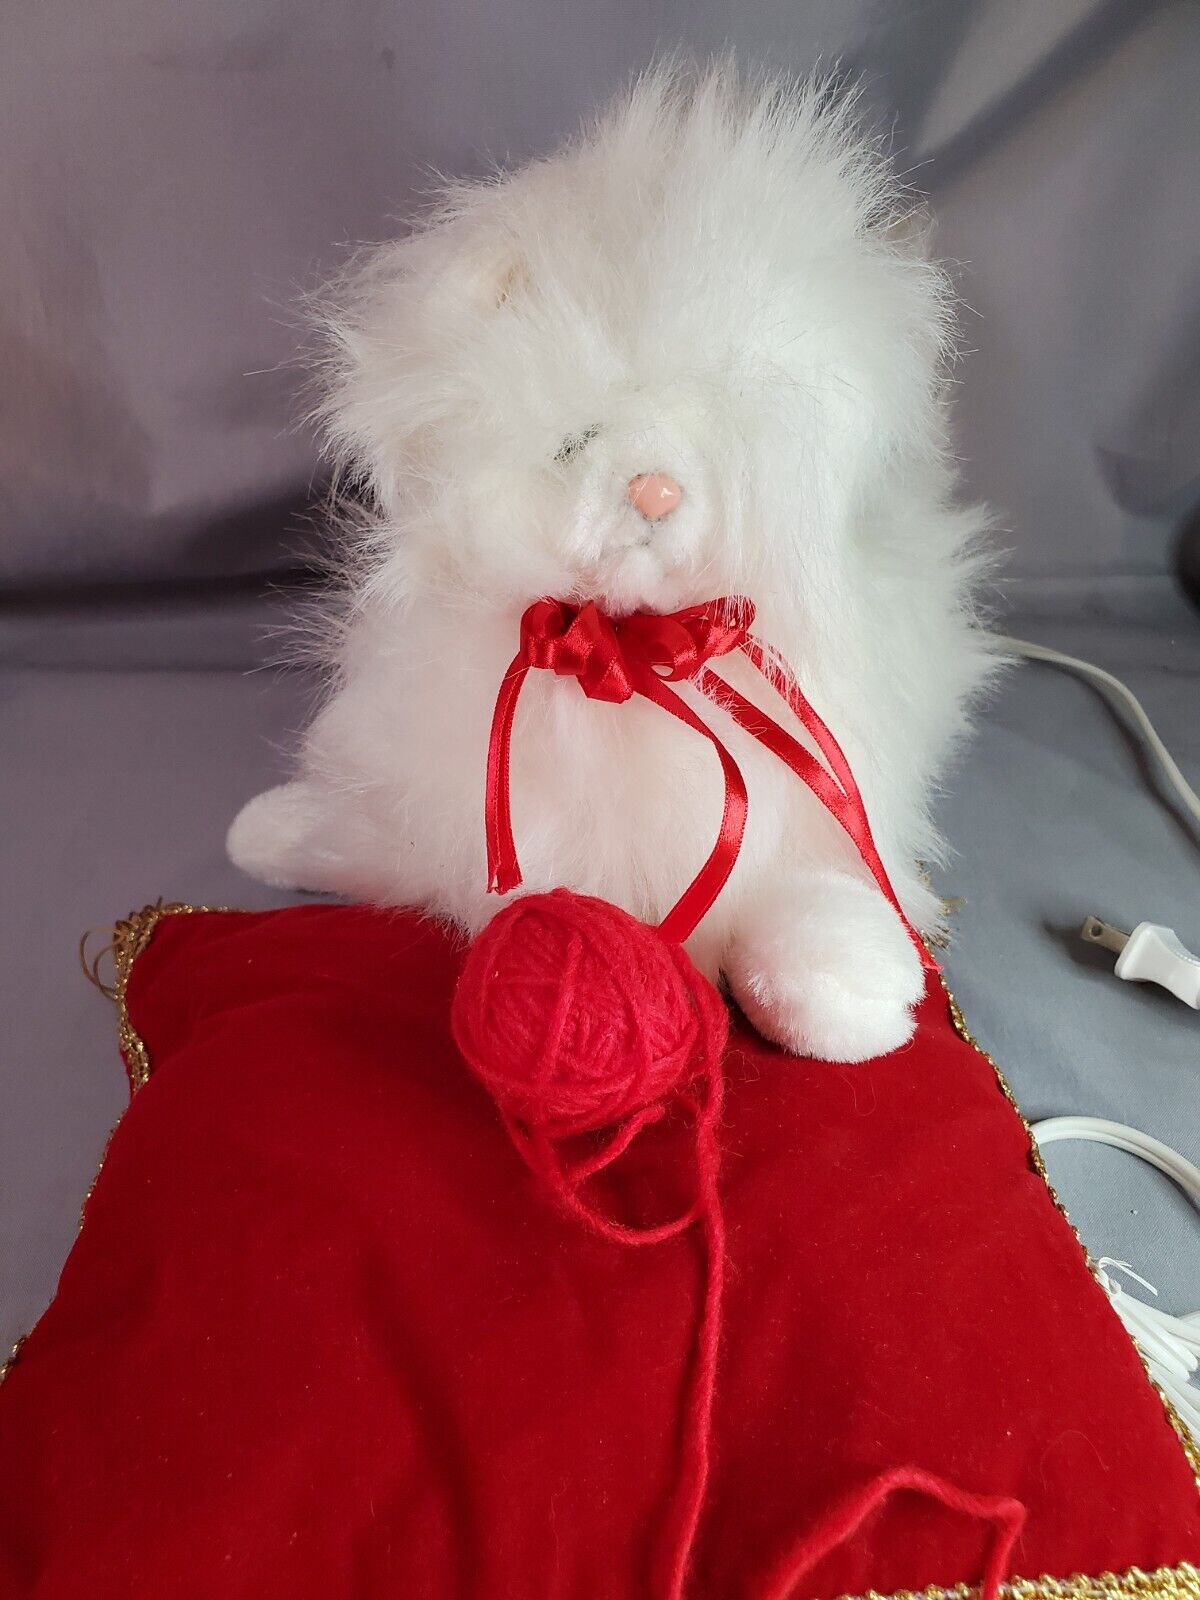  Cat Plush White Moves Purrs Electric Red Pillow Yarn Ball 1990s Santa\'s Best 